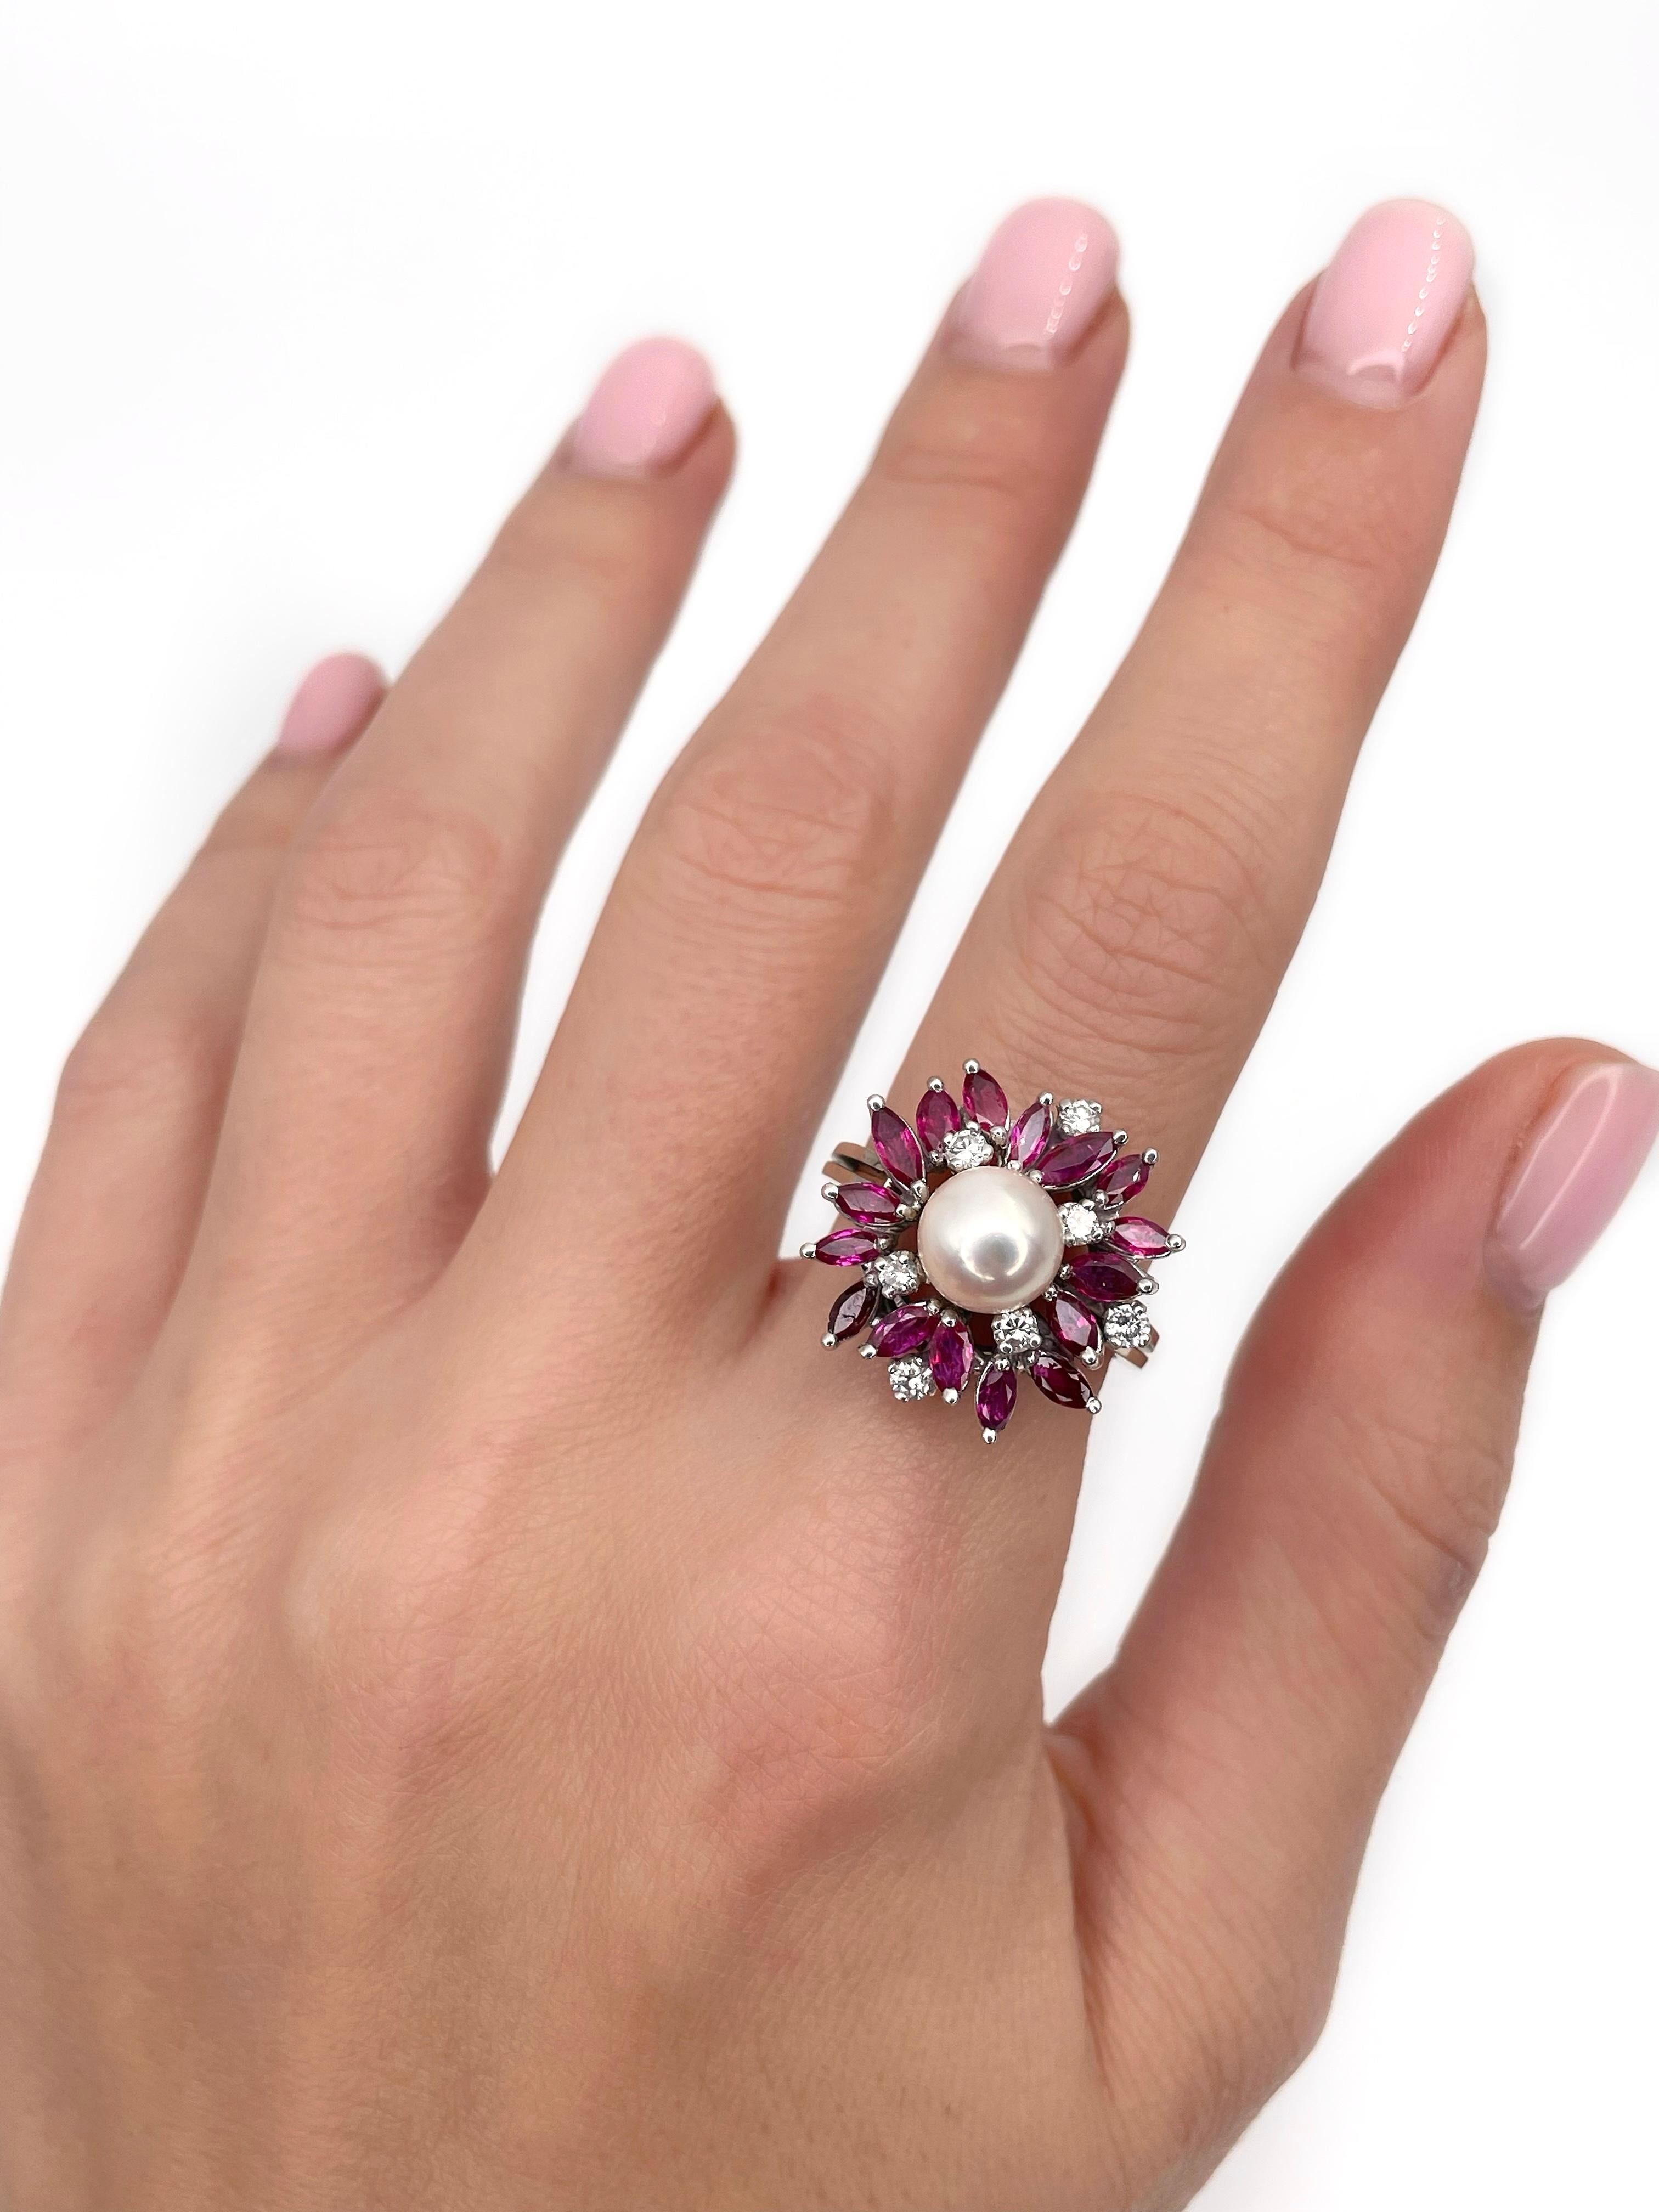 This is an asymmetrical design cocktail ring crafted in 18K gold. The piece features: 
- 1 cultured pearl
- 16 marquise cut rubies, TW 1.00ct, slpR 6/4, VS-SI
- 7 brilliant cut diamonds, TW 0.25ct, RW+/RW, VS

Weight: 8.12g
Size: 17 (US